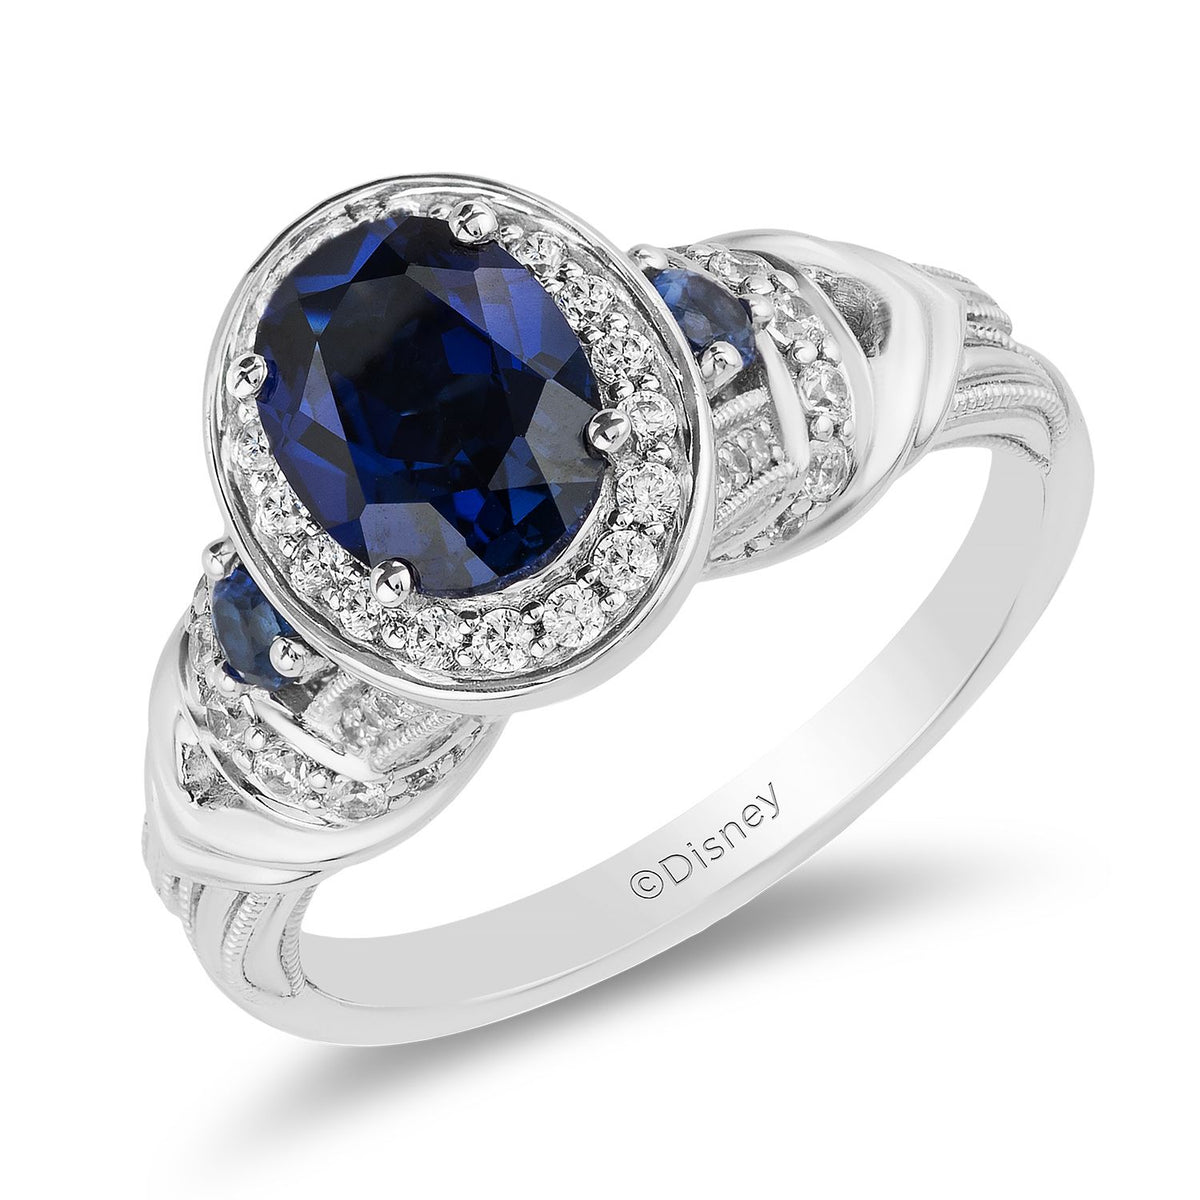 10K White Gold and Blue Sapphire Cinderella Engagement Ring